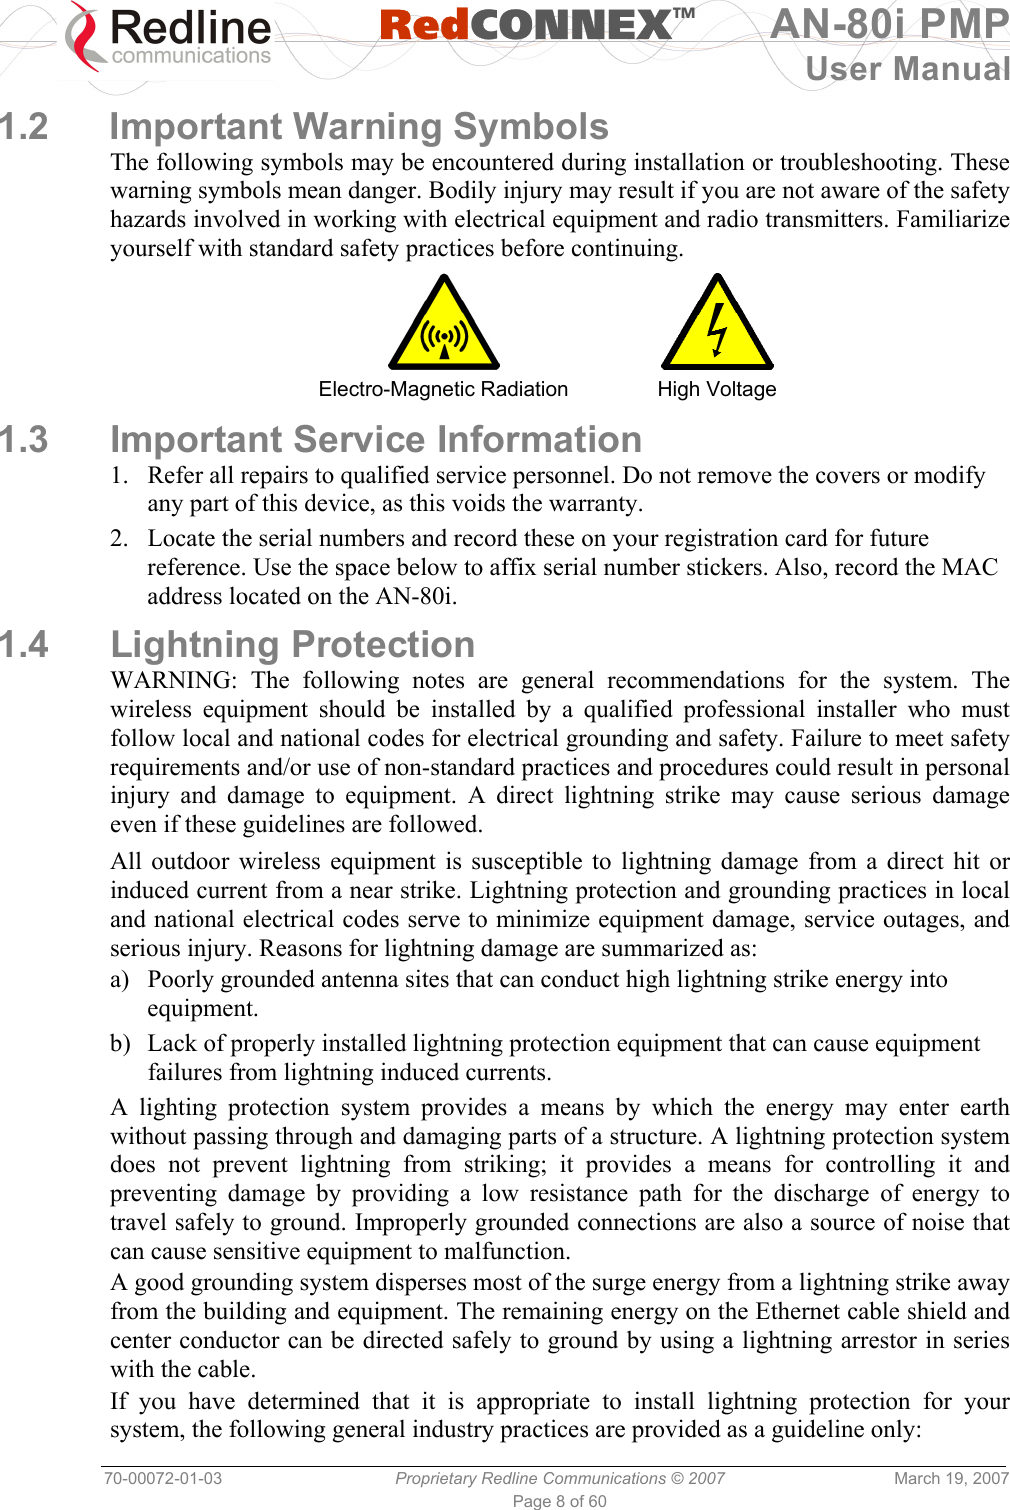   RedCONNEXTM AN-80i PMP User Manual 70-00072-01-03  Proprietary Redline Communications © 2007  March 19, 2007 Page 8 of 60  1.2 Important Warning Symbols The following symbols may be encountered during installation or troubleshooting. These warning symbols mean danger. Bodily injury may result if you are not aware of the safety hazards involved in working with electrical equipment and radio transmitters. Familiarize yourself with standard safety practices before continuing.   Electro-Magnetic Radiation  High Voltage 1.3  Important Service Information 1.  Refer all repairs to qualified service personnel. Do not remove the covers or modify any part of this device, as this voids the warranty. 2.  Locate the serial numbers and record these on your registration card for future reference. Use the space below to affix serial number stickers. Also, record the MAC address located on the AN-80i. 1.4 Lightning Protection WARNING: The following notes are general recommendations for the system. The wireless equipment should be installed by a qualified professional installer who must follow local and national codes for electrical grounding and safety. Failure to meet safety requirements and/or use of non-standard practices and procedures could result in personal injury and damage to equipment. A direct lightning strike may cause serious damage even if these guidelines are followed. All outdoor wireless equipment is susceptible to lightning damage from a direct hit or induced current from a near strike. Lightning protection and grounding practices in local and national electrical codes serve to minimize equipment damage, service outages, and serious injury. Reasons for lightning damage are summarized as: a)  Poorly grounded antenna sites that can conduct high lightning strike energy into equipment. b)  Lack of properly installed lightning protection equipment that can cause equipment failures from lightning induced currents. A lighting protection system provides a means by which the energy may enter earth without passing through and damaging parts of a structure. A lightning protection system does not prevent lightning from striking; it provides a means for controlling it and preventing damage by providing a low resistance path for the discharge of energy to travel safely to ground. Improperly grounded connections are also a source of noise that can cause sensitive equipment to malfunction. A good grounding system disperses most of the surge energy from a lightning strike away from the building and equipment. The remaining energy on the Ethernet cable shield and center conductor can be directed safely to ground by using a lightning arrestor in series with the cable. If you have determined that it is appropriate to install lightning protection for your system, the following general industry practices are provided as a guideline only: 